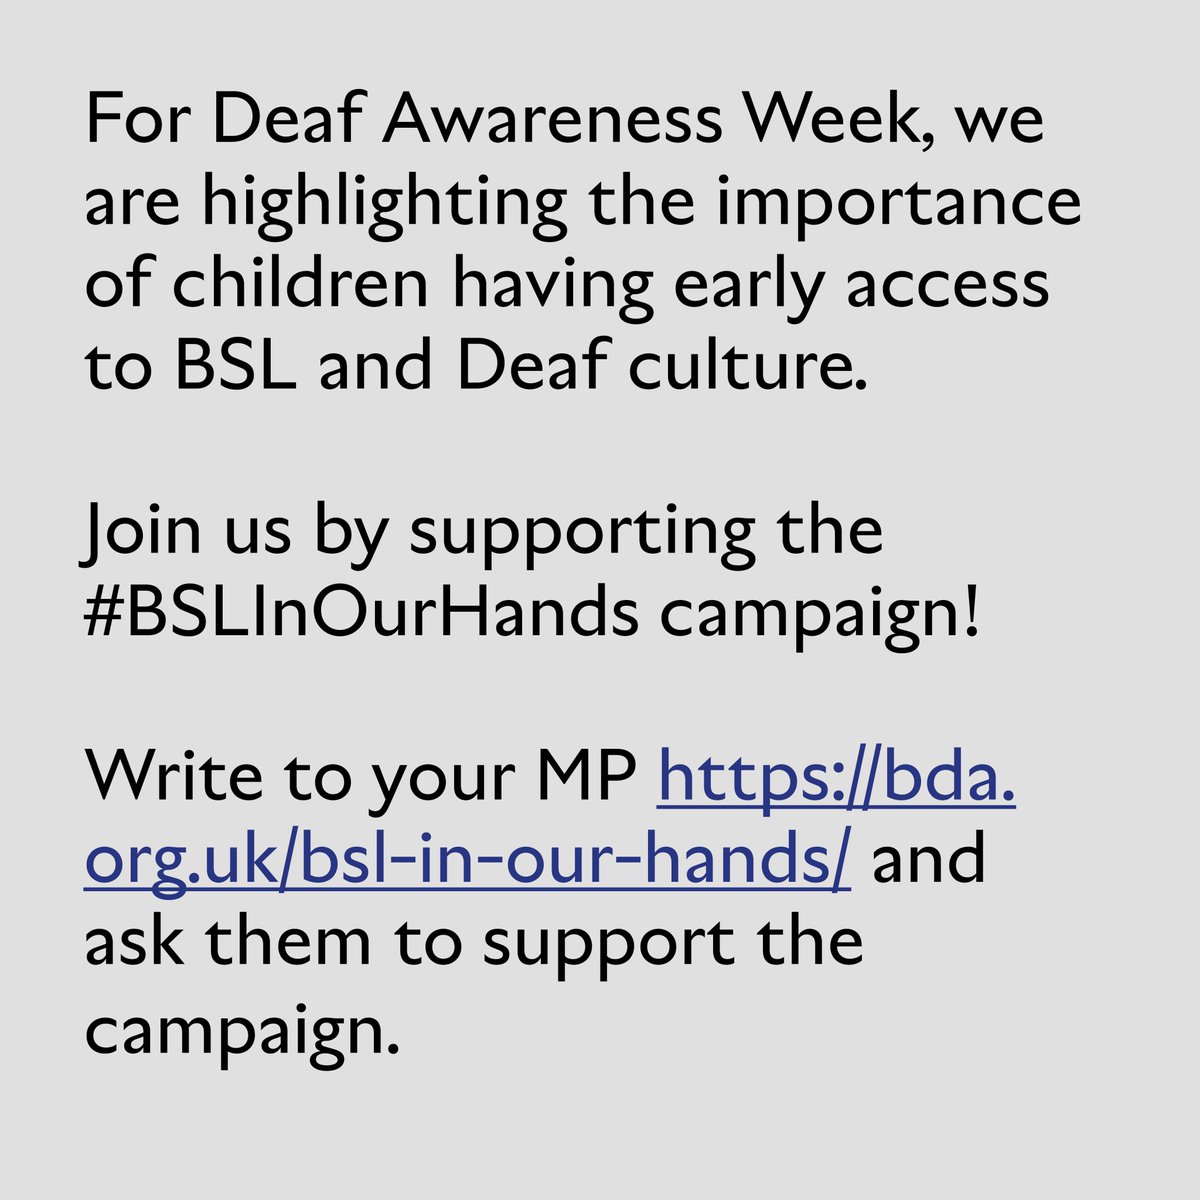 For #DeafAwarenessWeek2024 we welcomed Rebecca Mansell from @BDA_Deaf to learn more about their #BSLInOurHands campaign and the importance of children having early access to BSL & Deaf Culture. bda.org.uk/our-manifesto/ #DeafAwarenessWeek #BSLinourhands #HandprintPetition